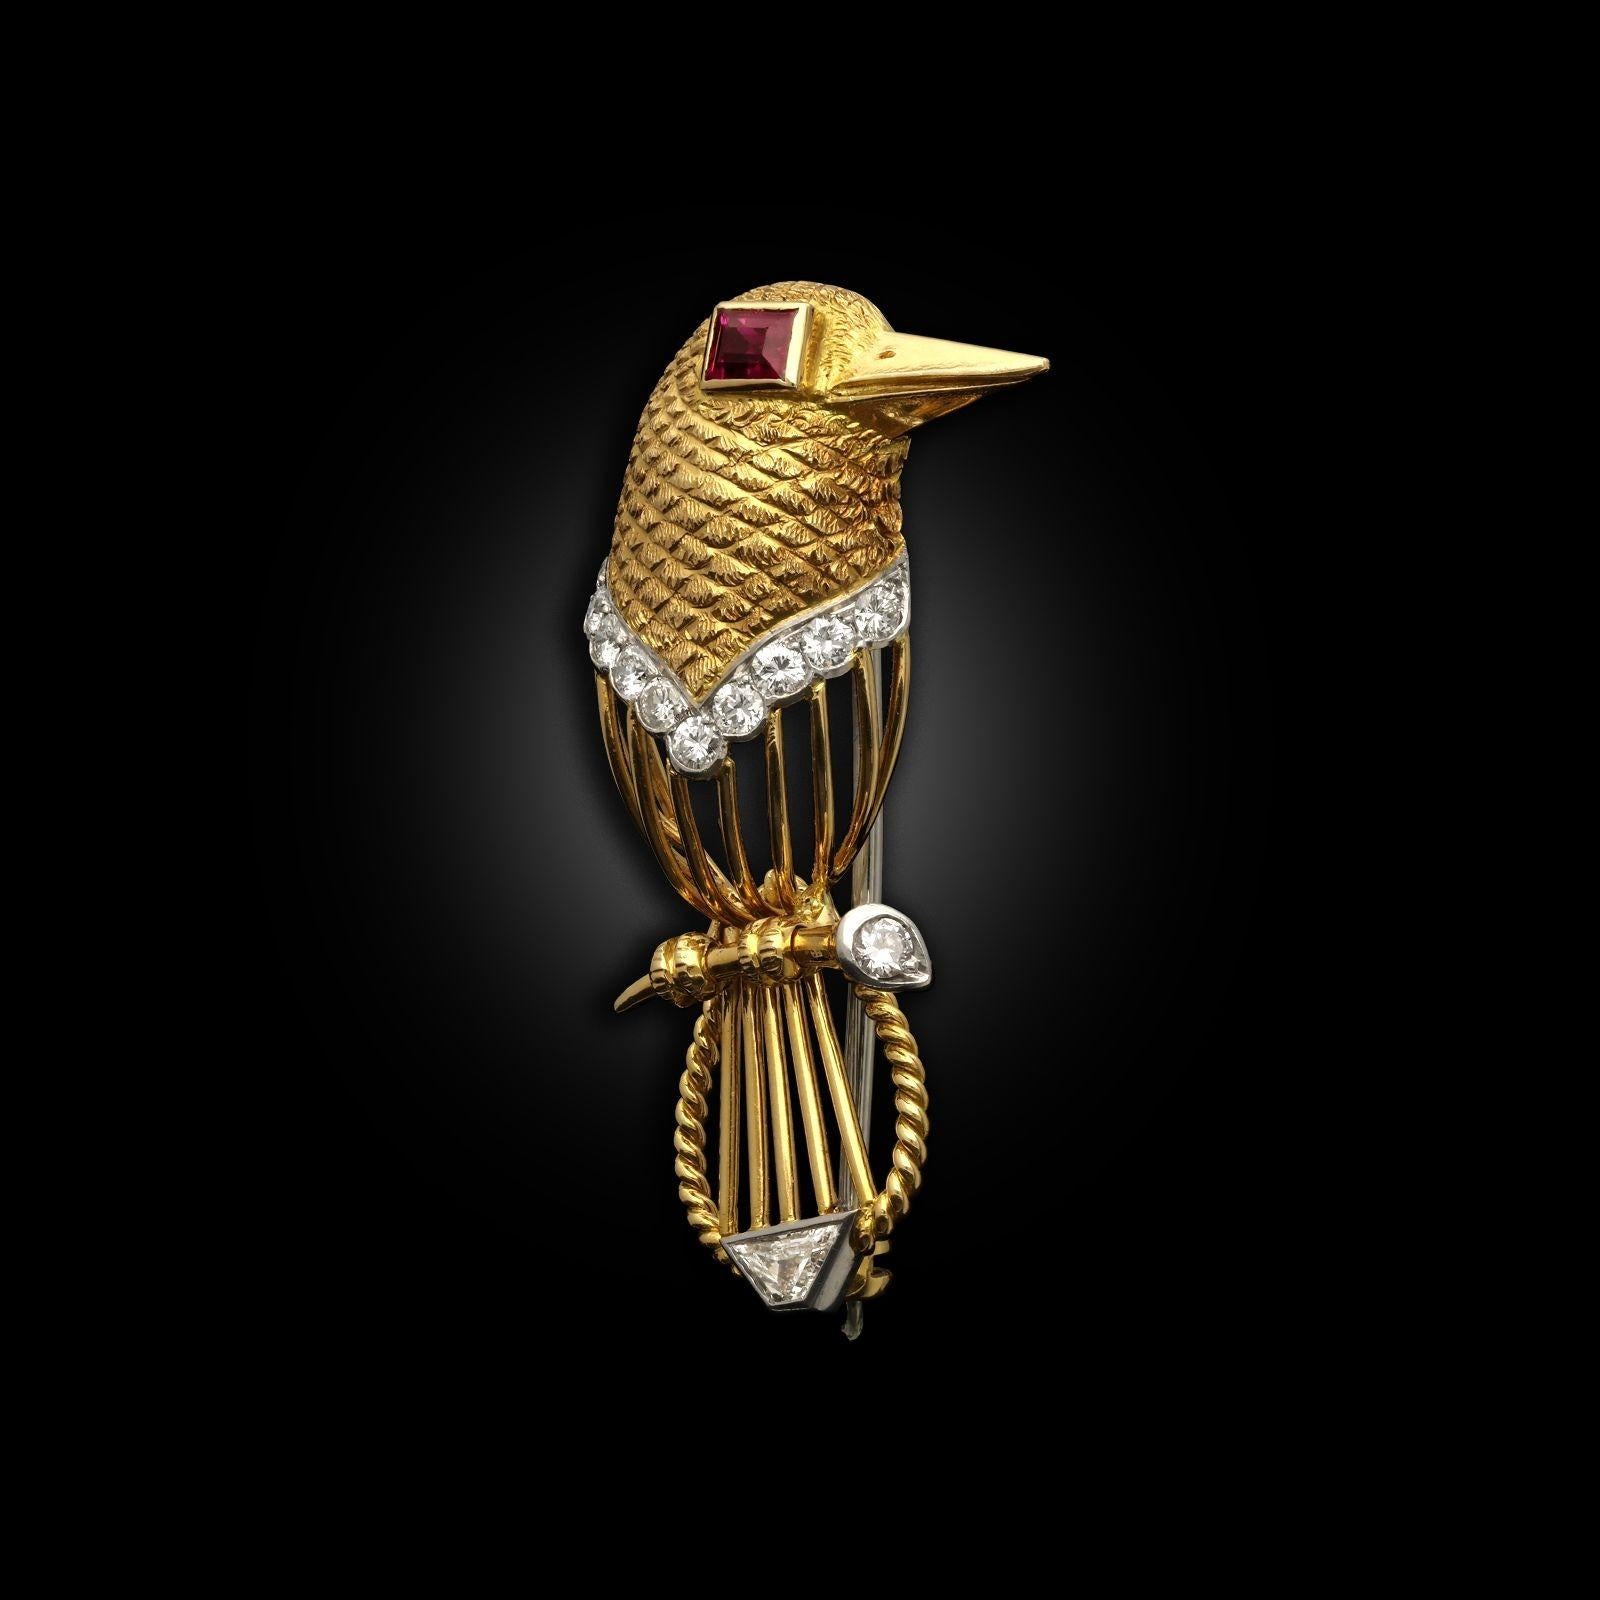 A vintage stylised bird brooch by Cartier circa 1960s. The bird is designed in 18ct yellow gold with a textured feather pattern on the head, an open gold wire body with a rope twist on the tail. The bird has round brilliant cut diamond details set